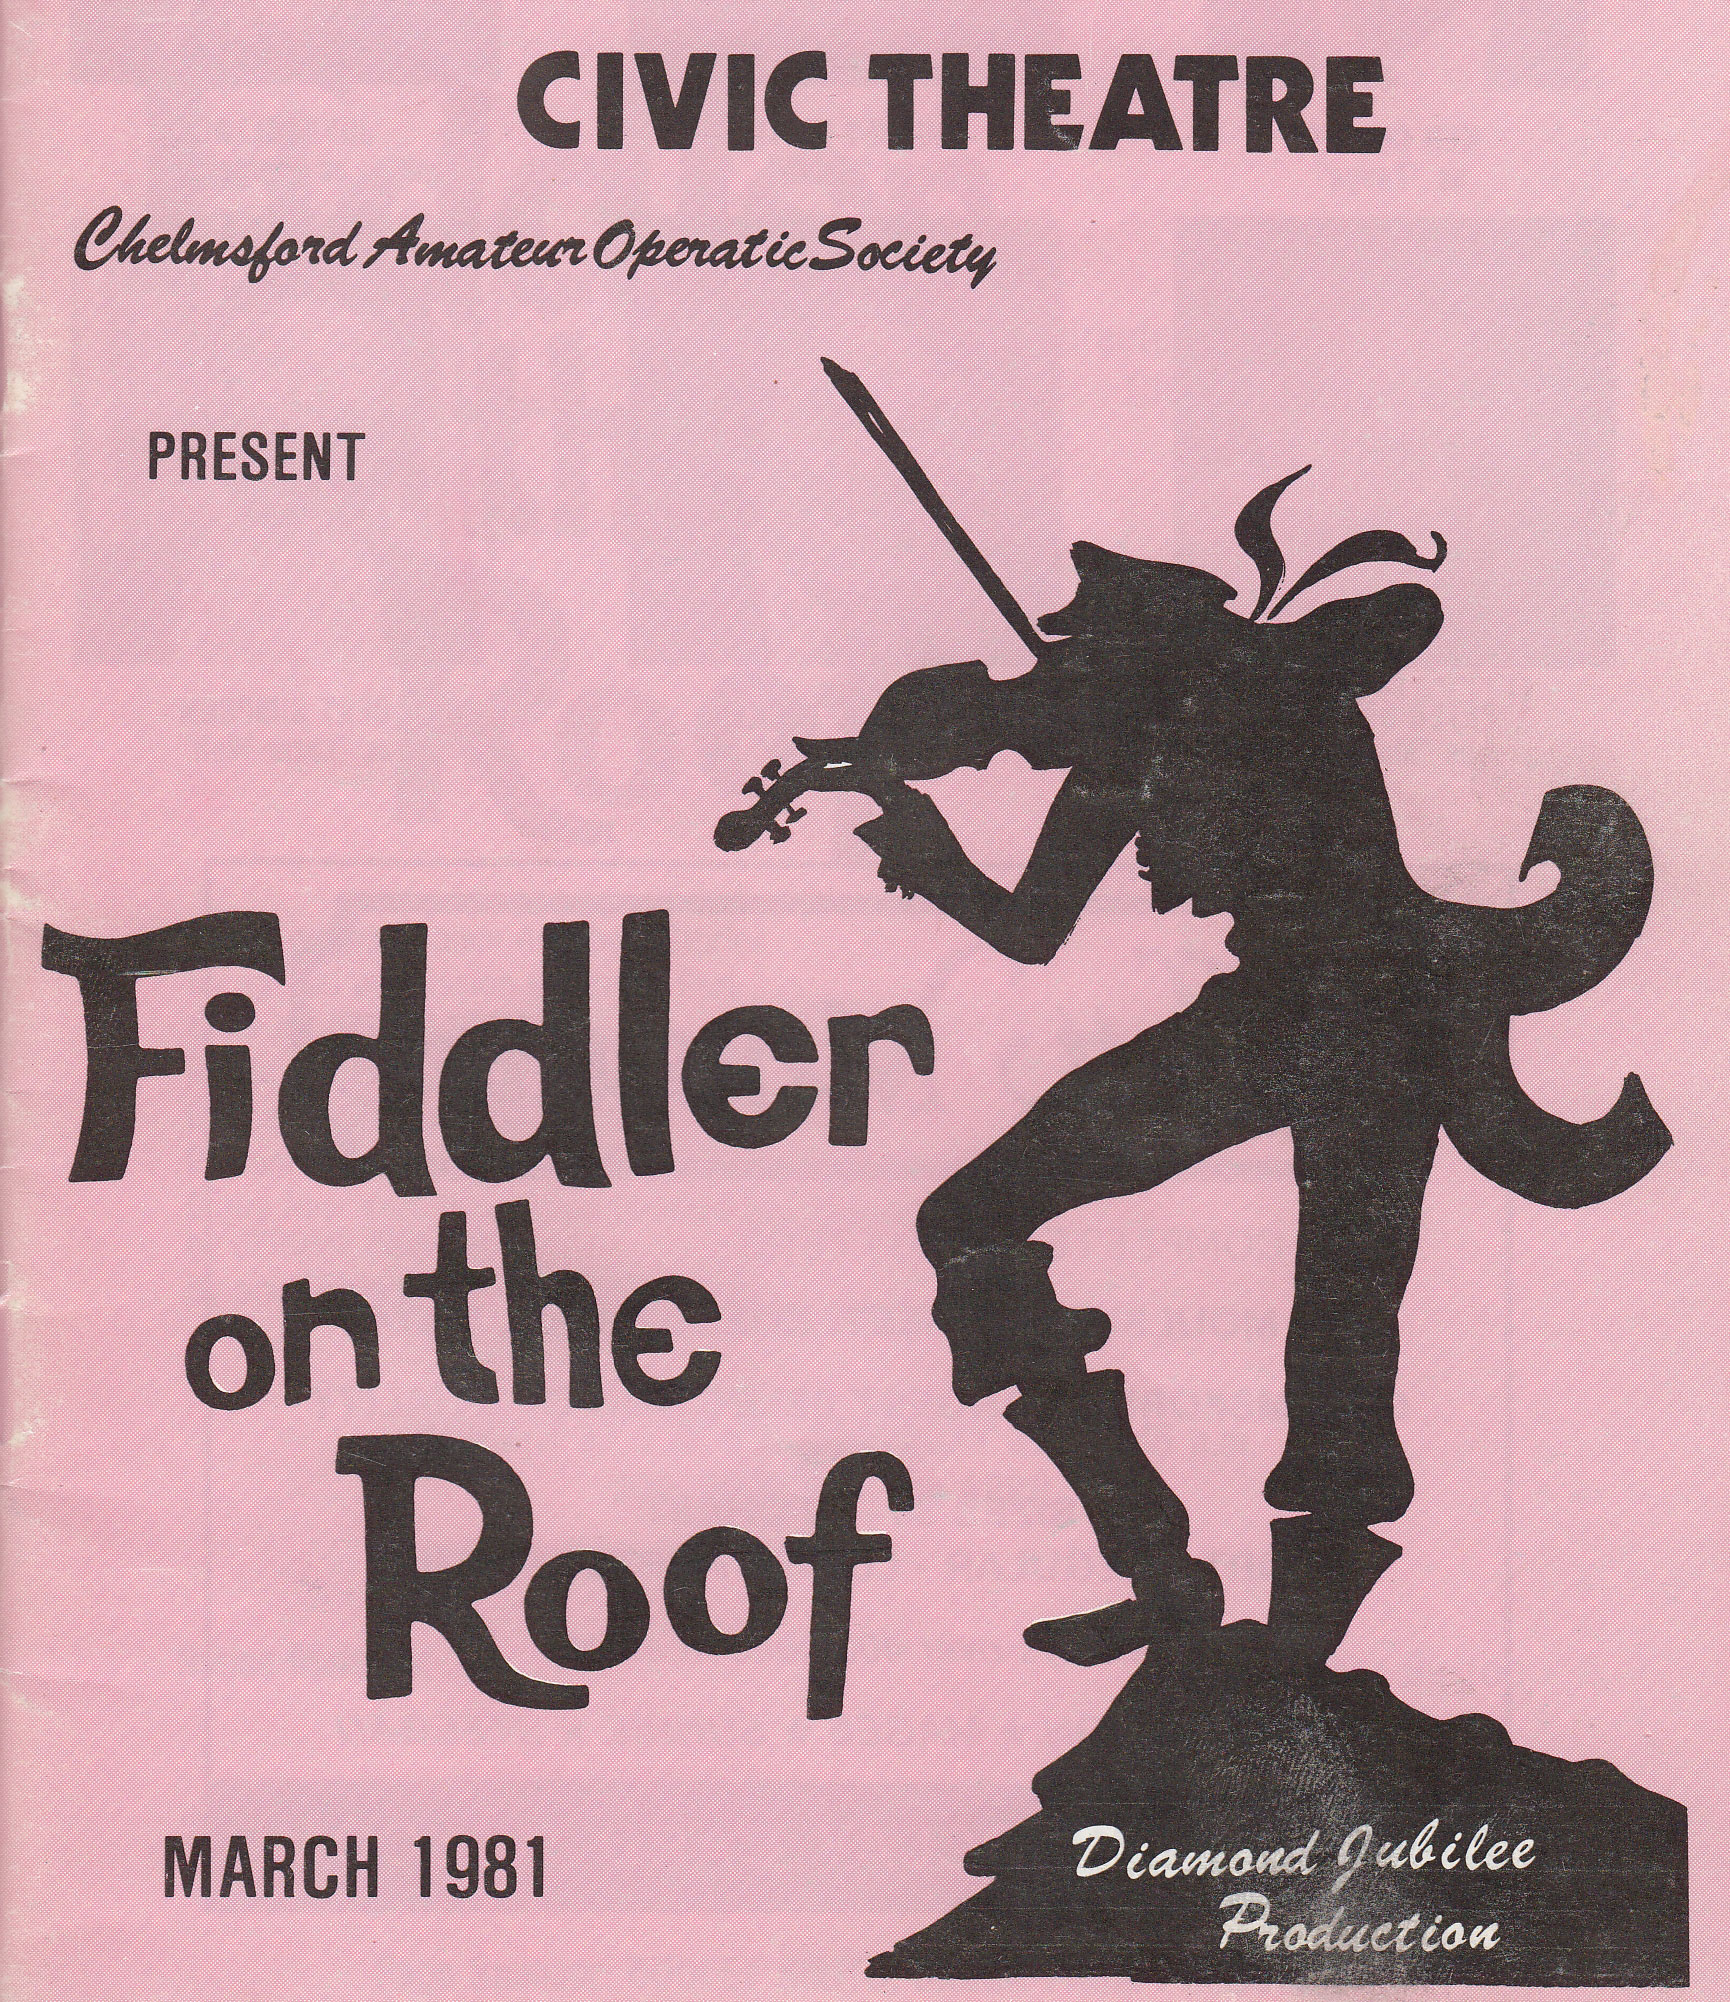 Fiddler on the Roof (1981)